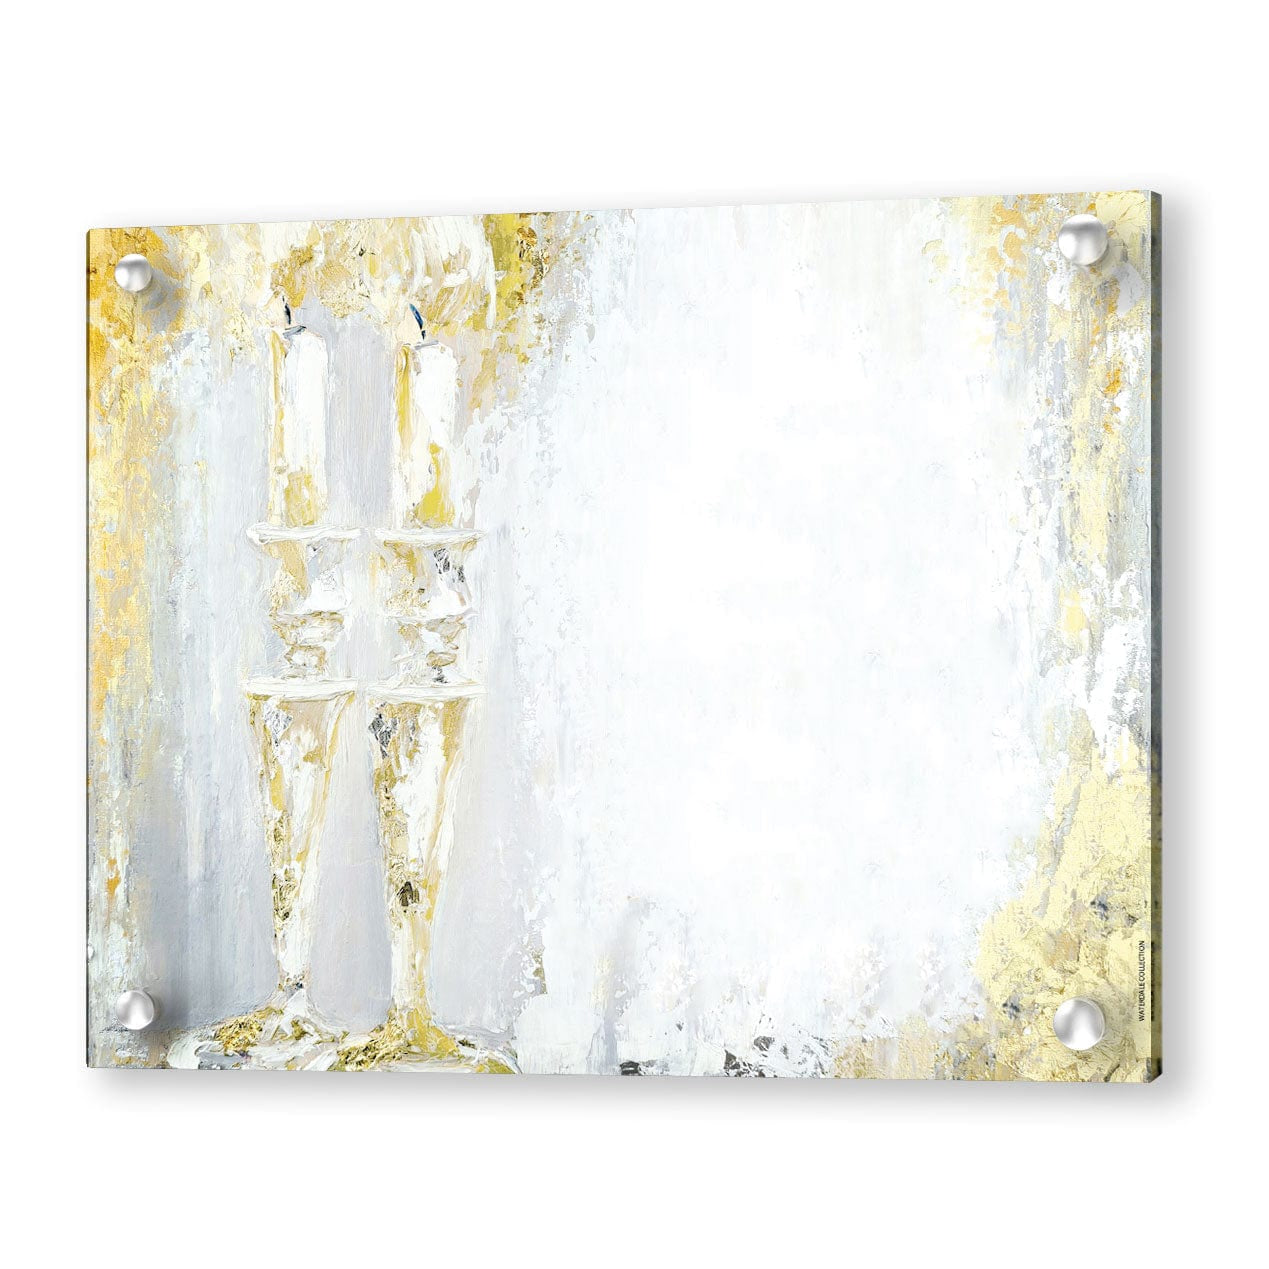 Painted Candles Gold Custom Print Wall Art - Waterdale Collection